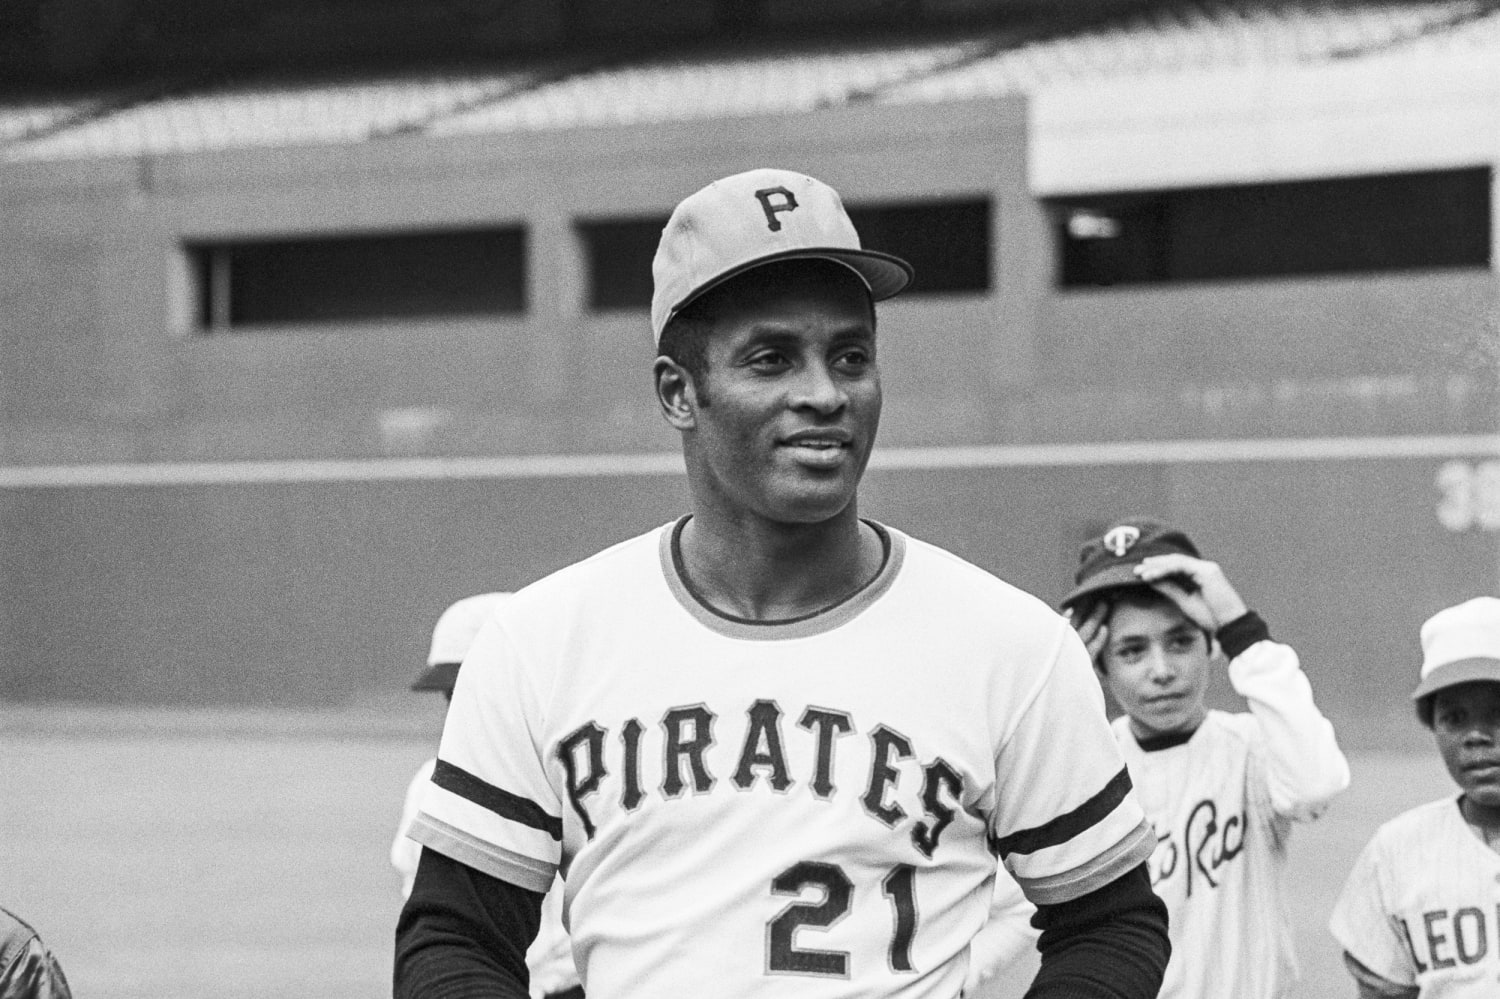 Roberto Clemente's destiny was shaped as a youngster in Puerto Rico